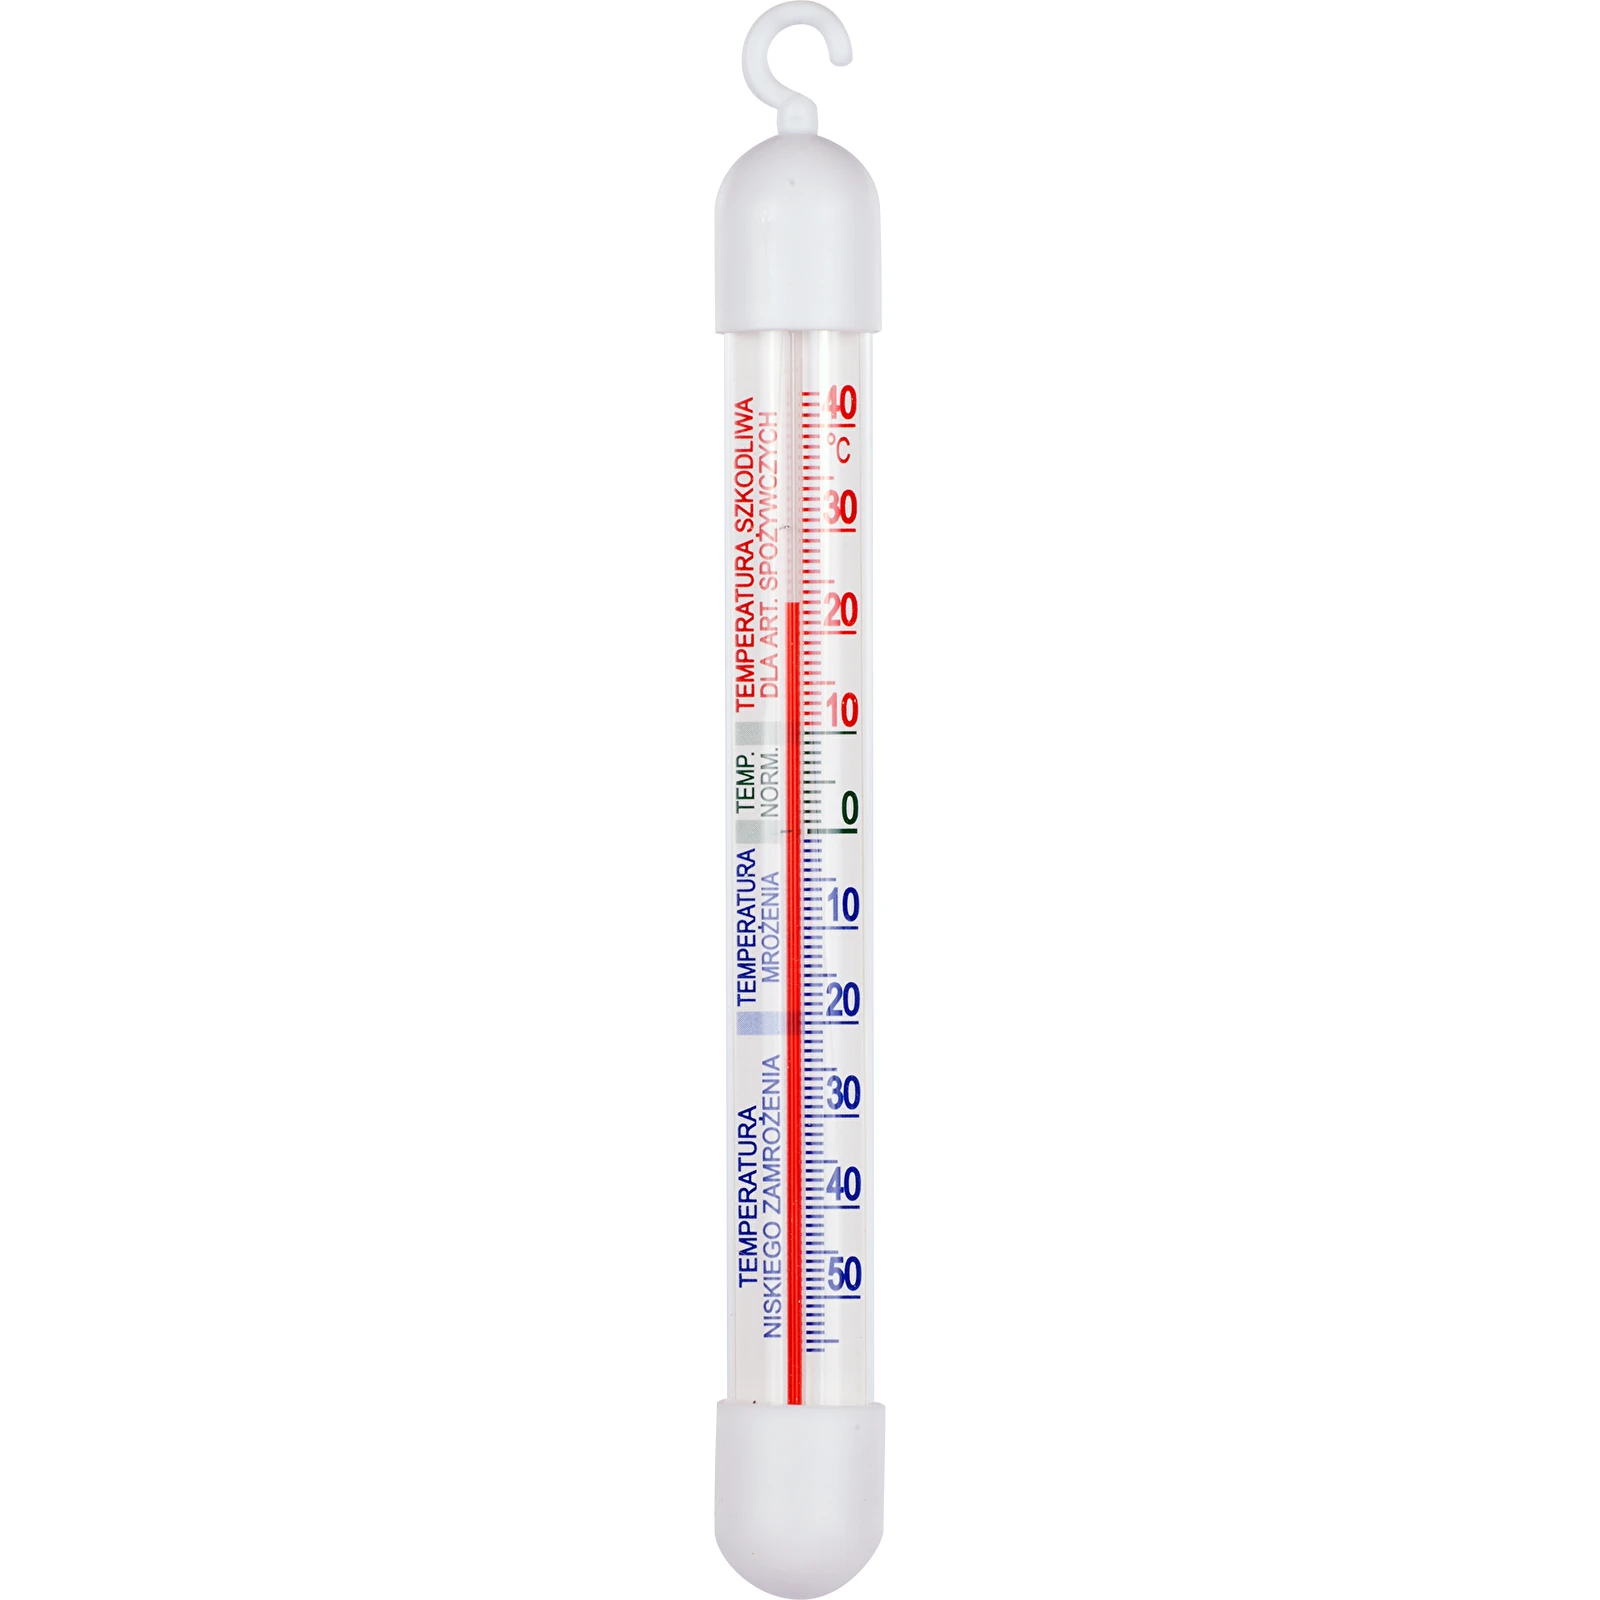 https://browin.com/static/images/1600/thermometer-for-refrigerators-and-freezers-50-c-to-40-c-17cm-040100.webp